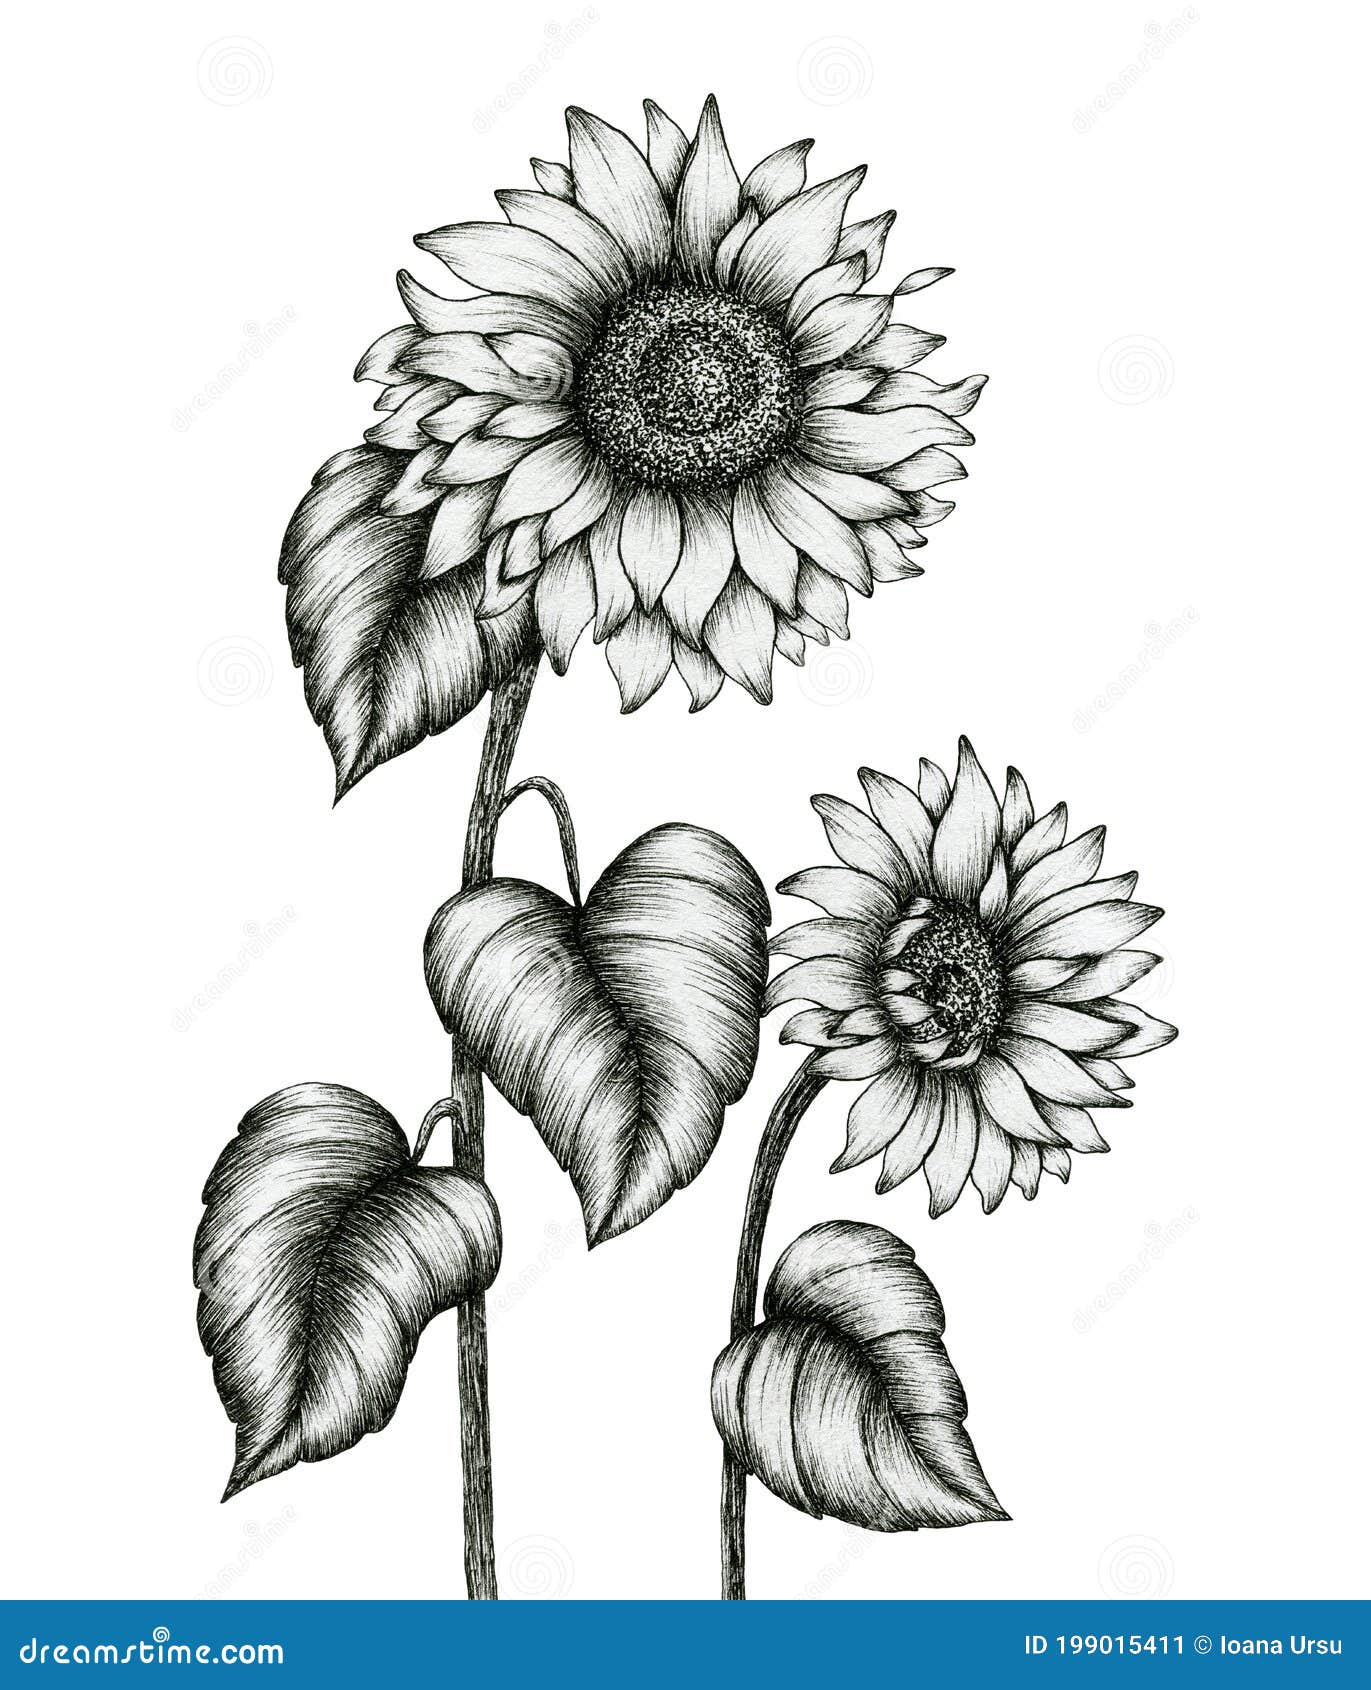 Sunflower pencil drawing  Sunflower sketches Sunflower drawing Flower  art painting